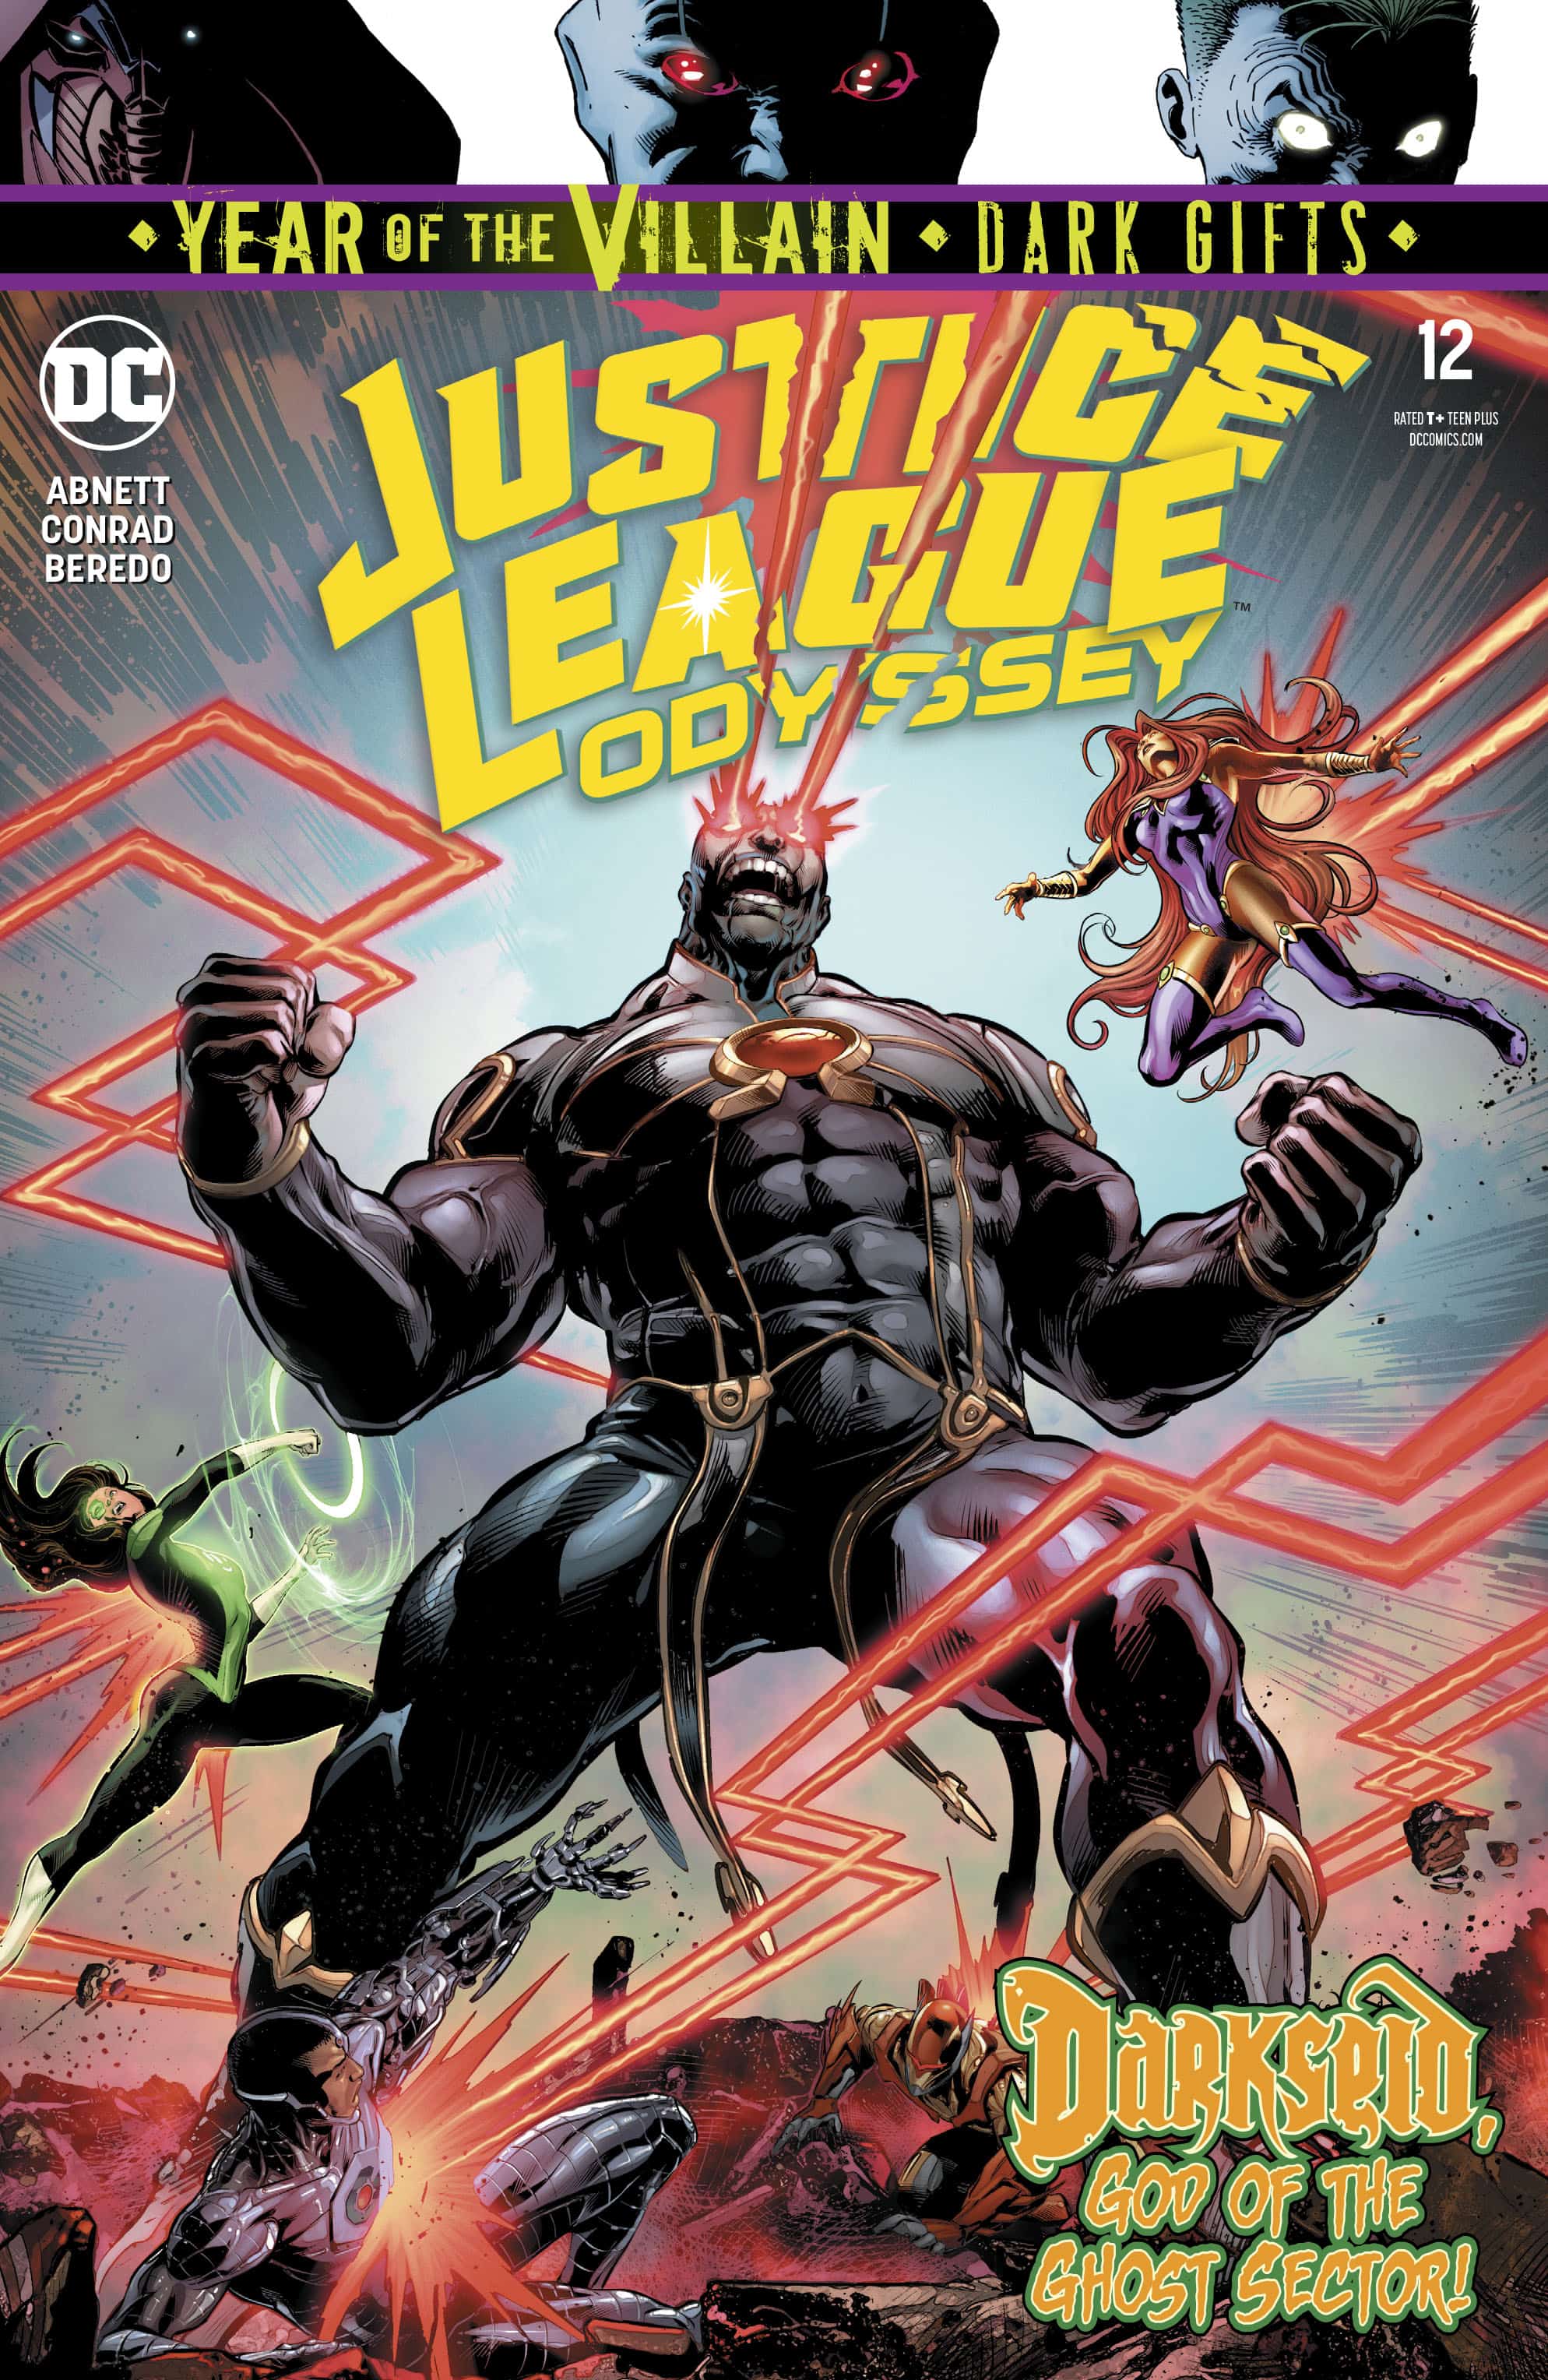 DC Comics Heralds the Death of the Justice League In April